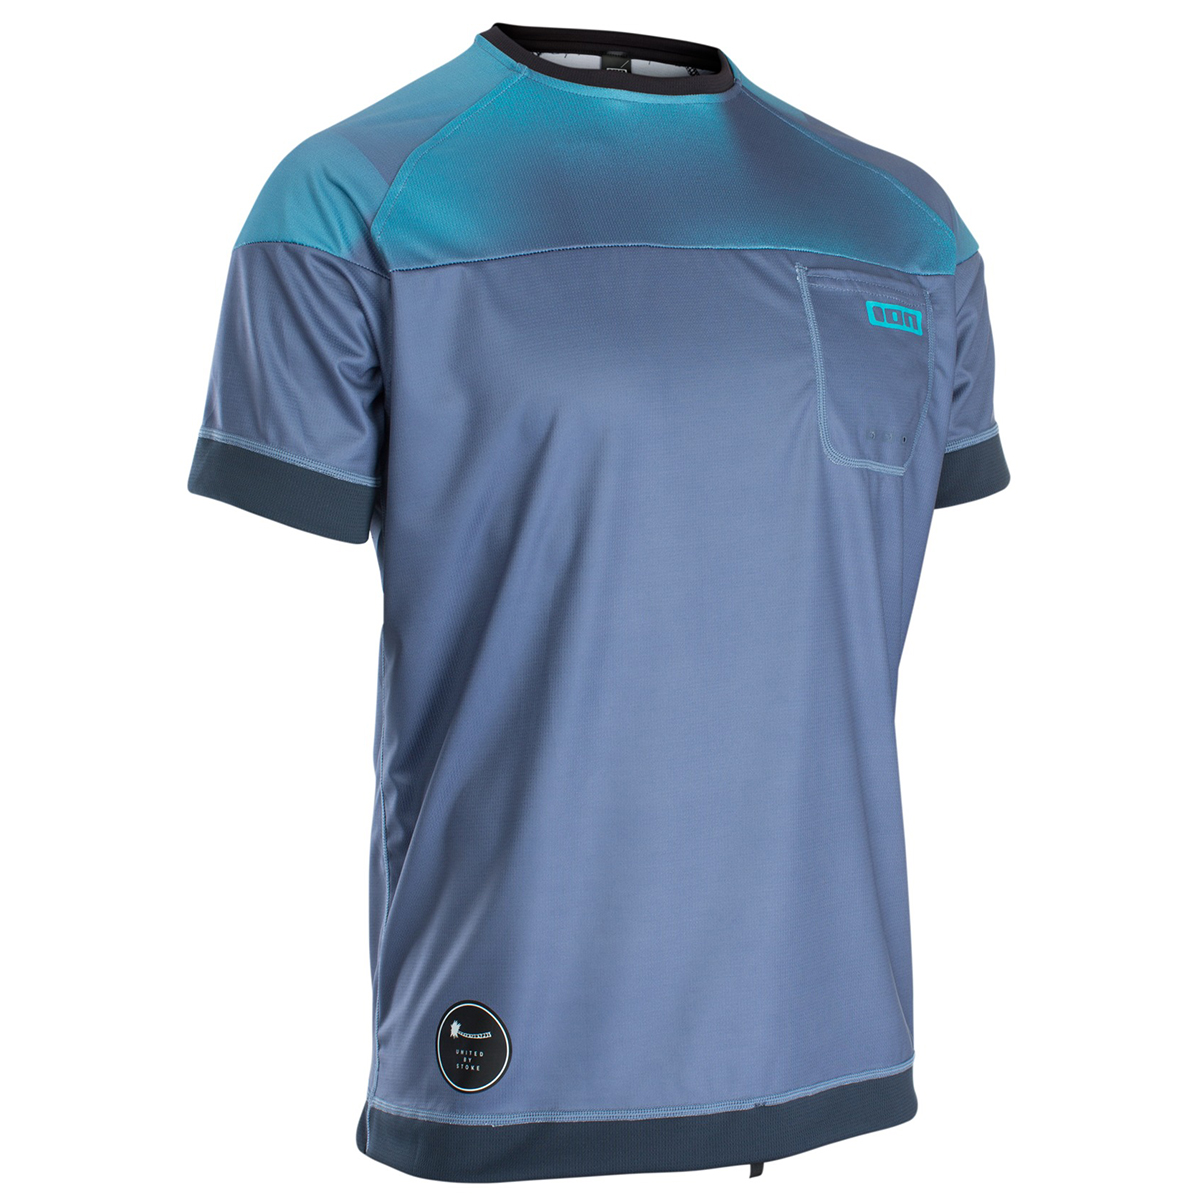 ION Mens wetshirt SS blue 2020 - Price, Reviews - EASY SURF Shop